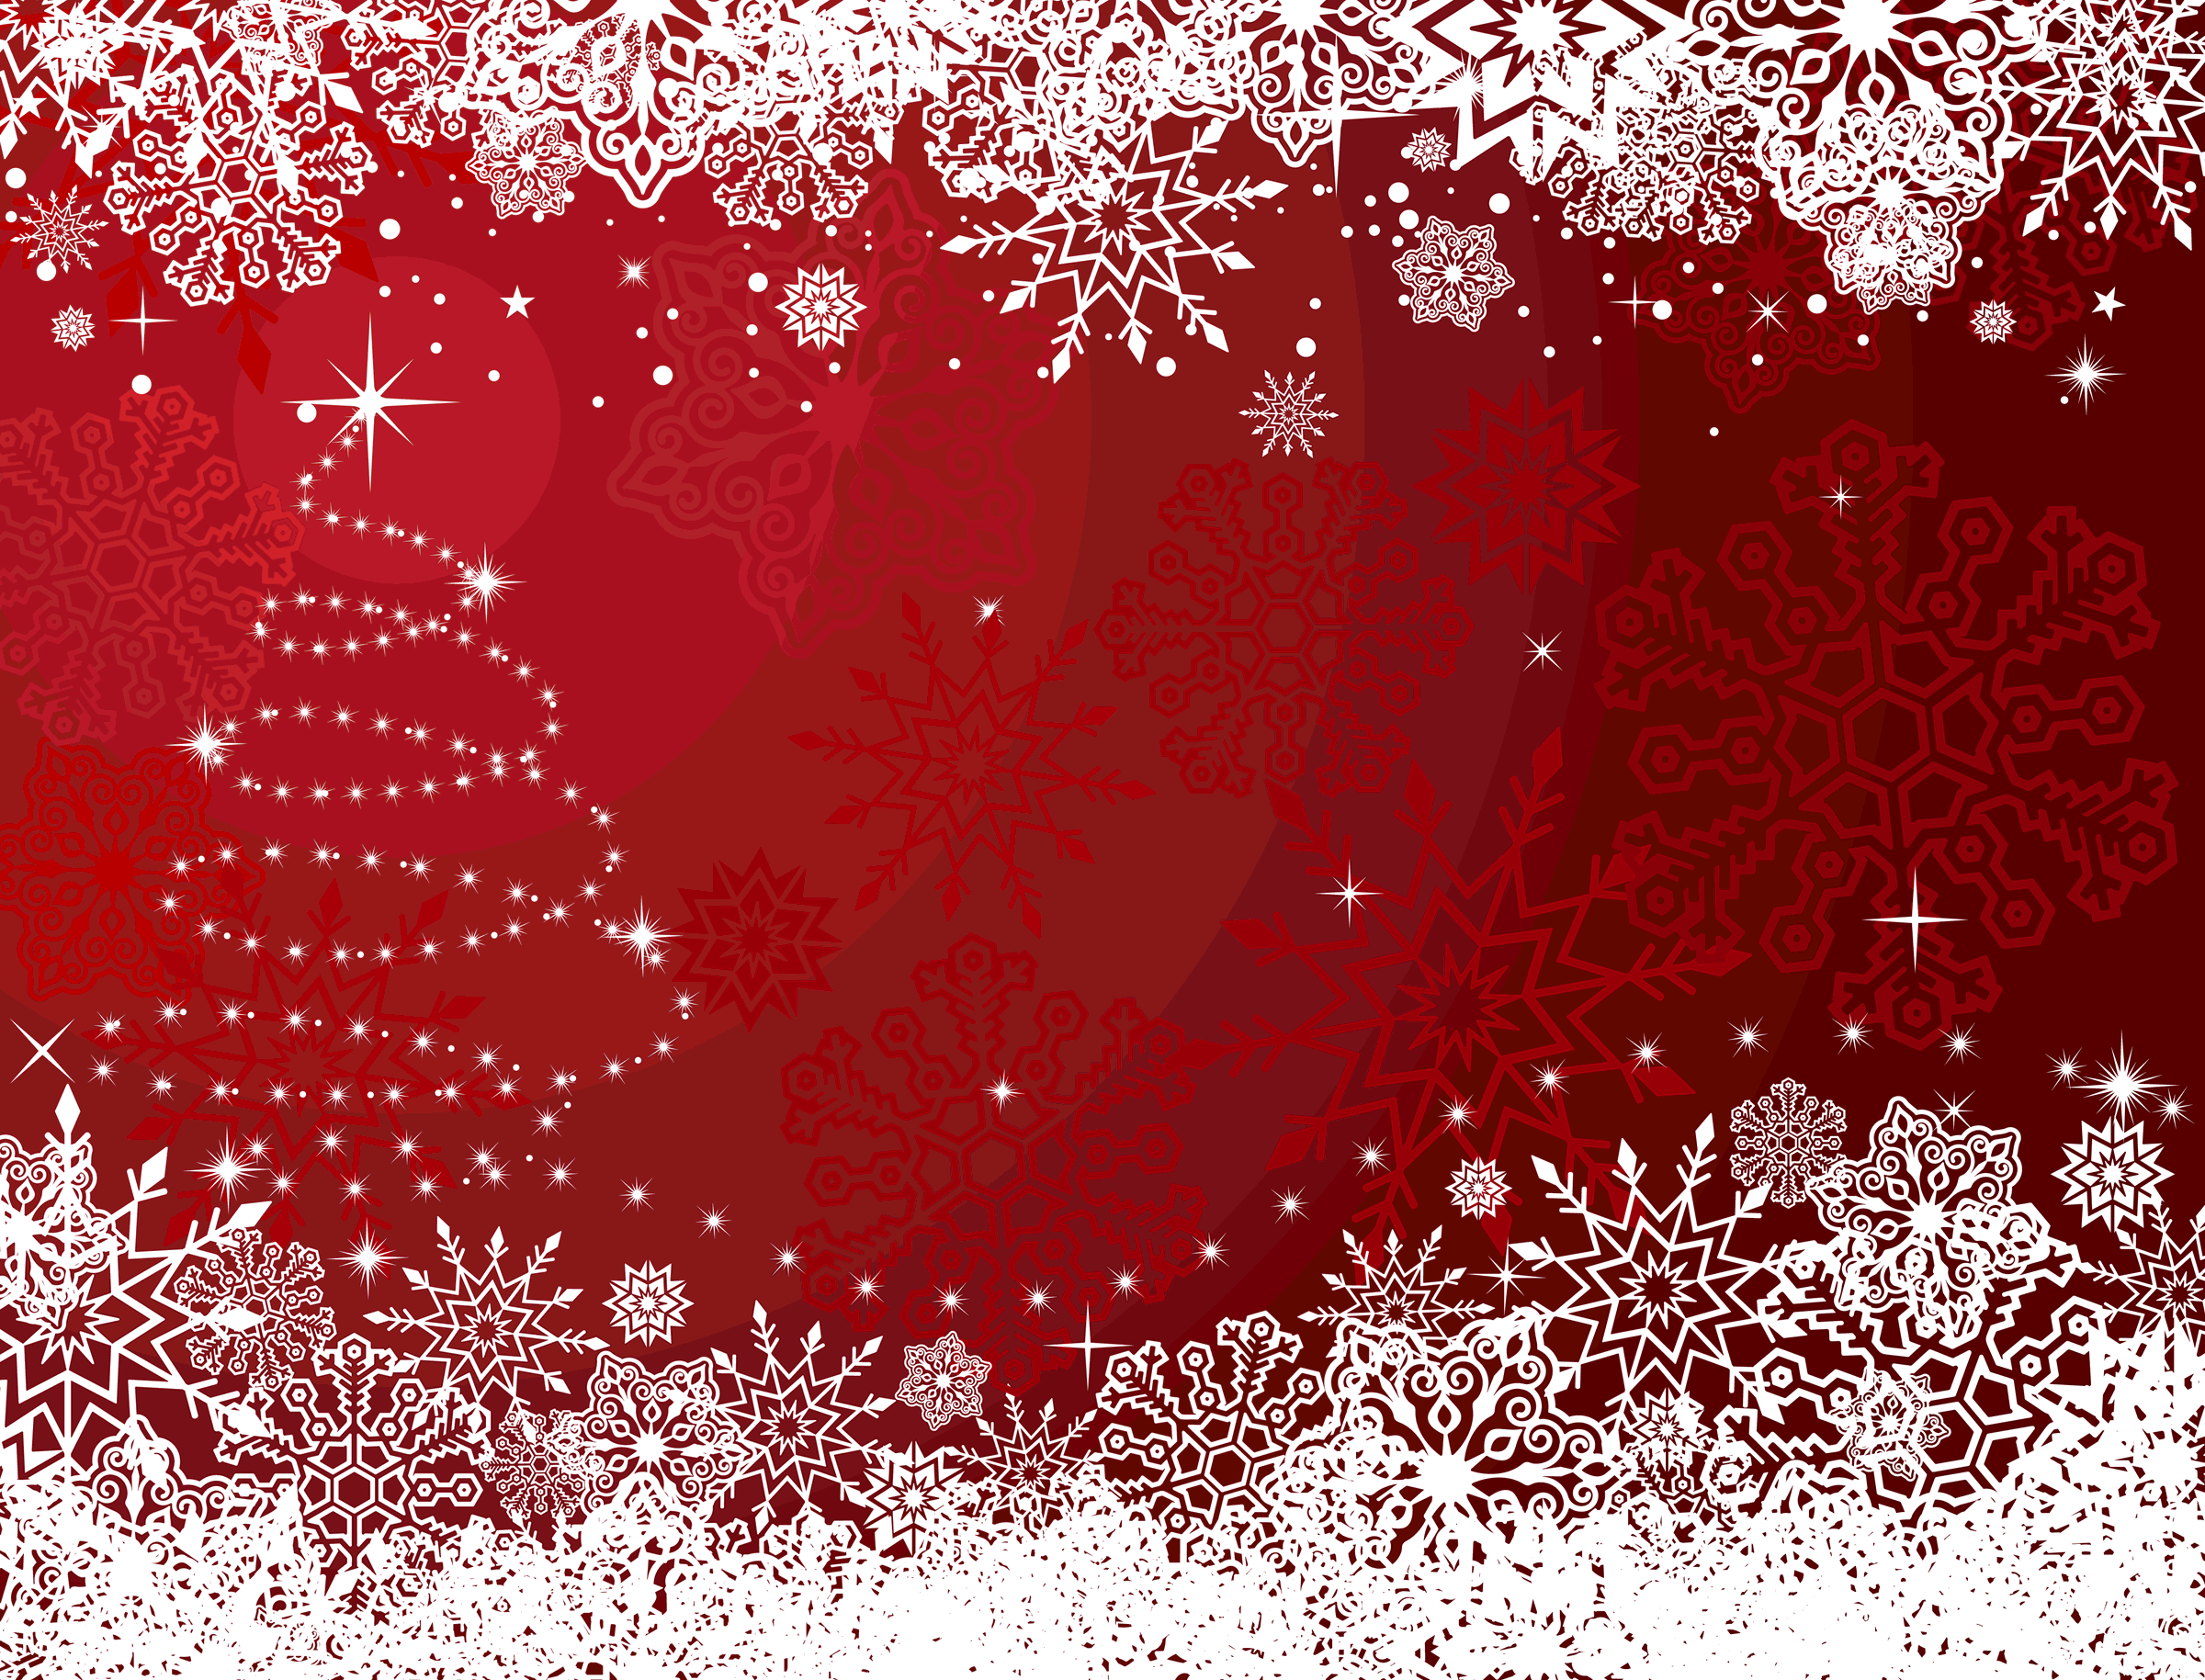 Christmas Backgrounds - Wallpaper Cave